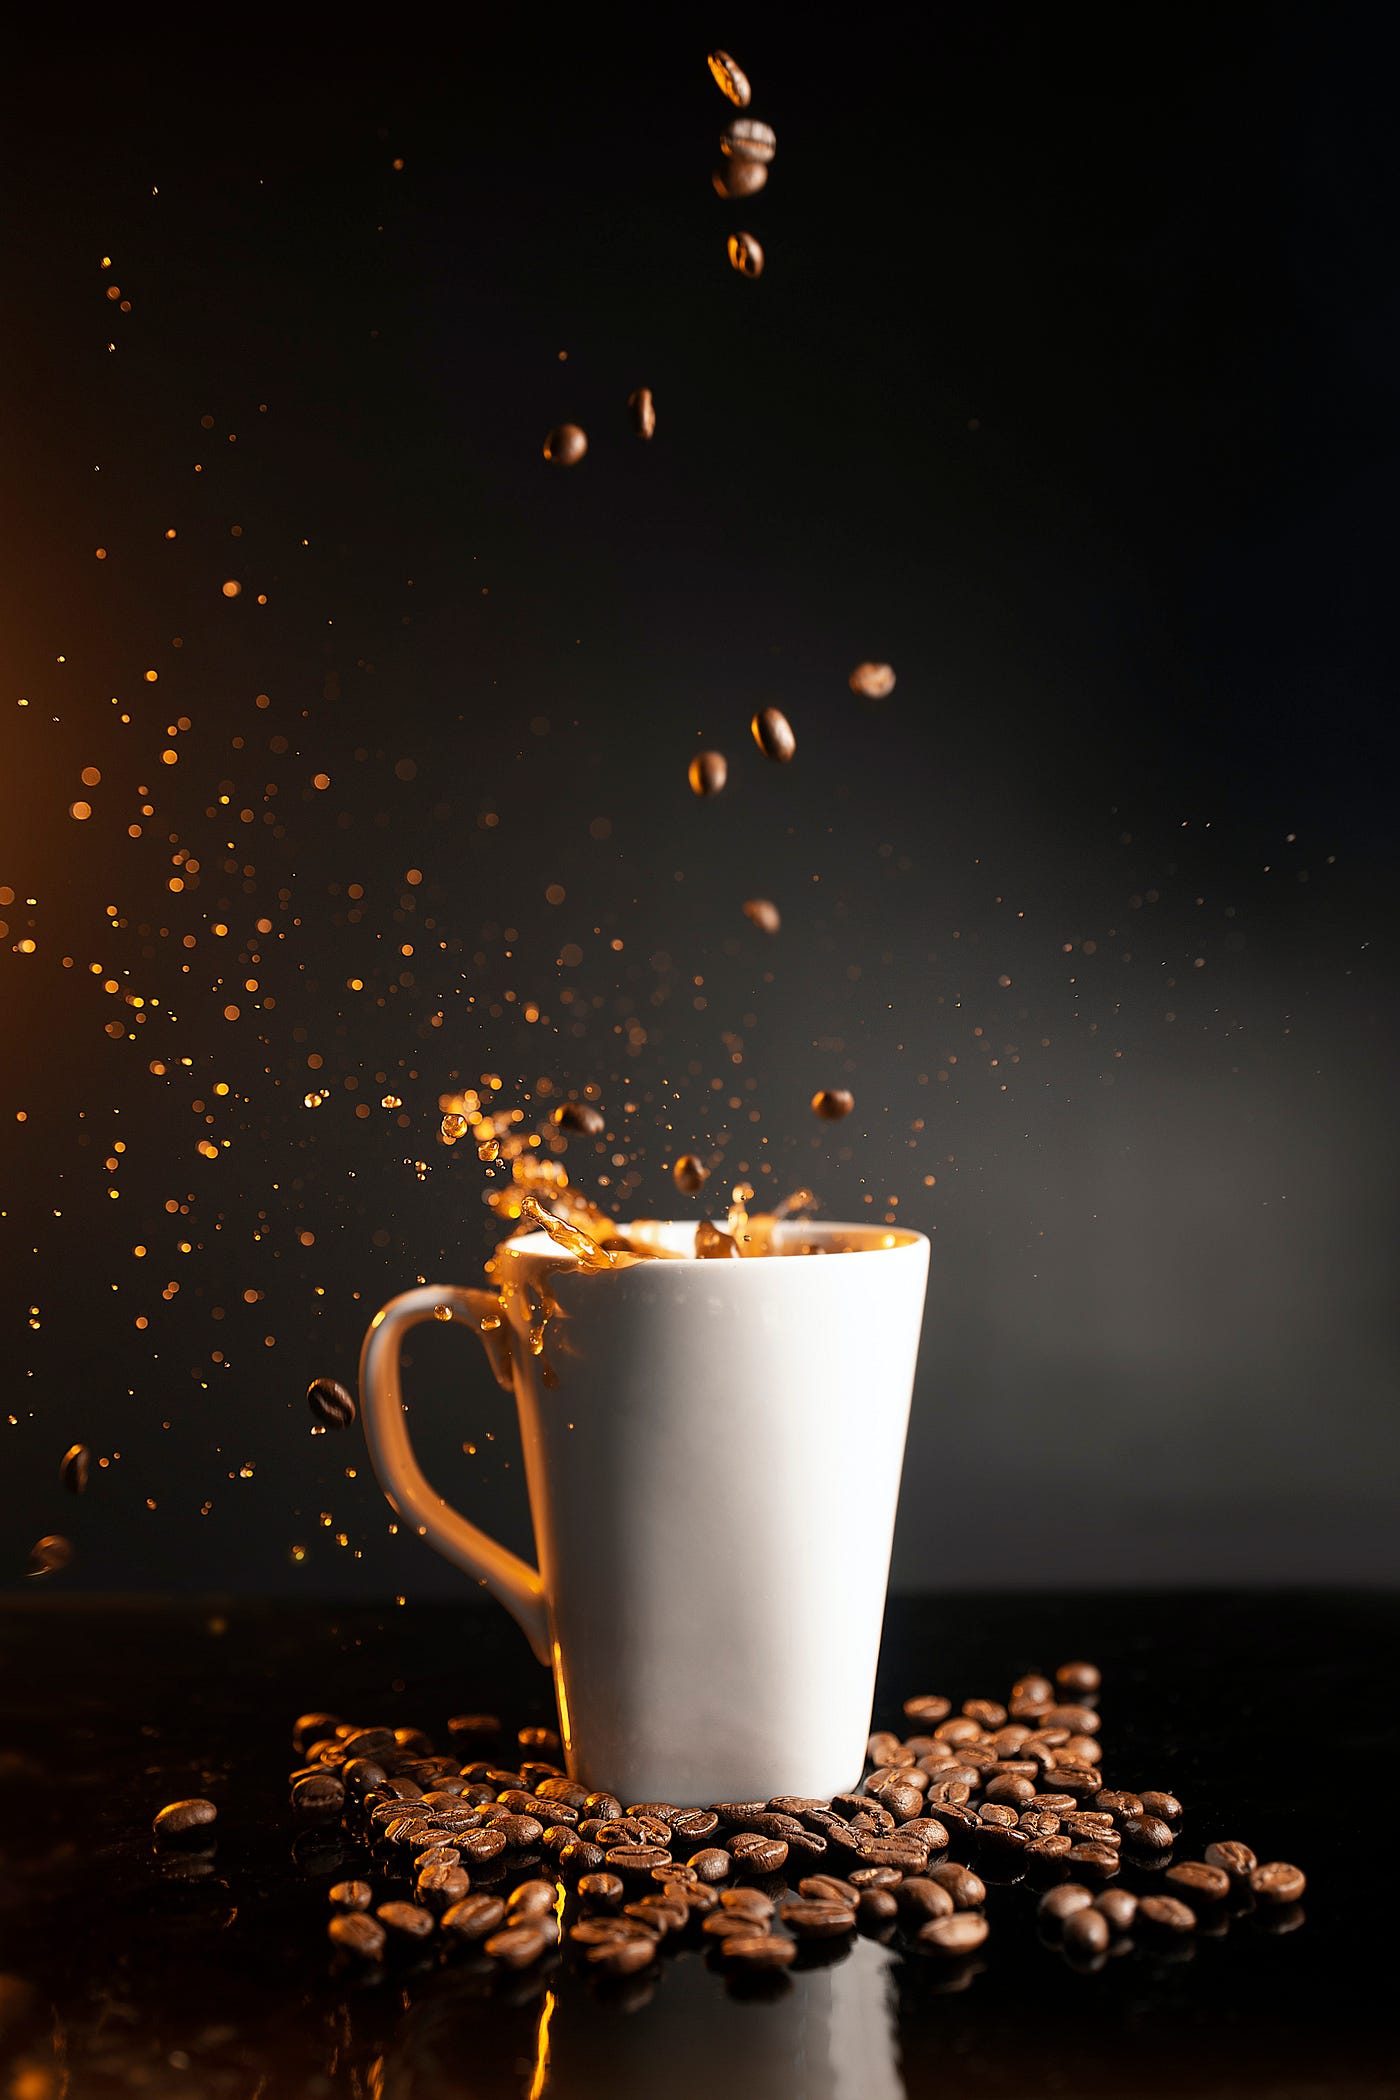 A photo of coffee beans frop into a tall white cup of coffee, splashing its contents upward. Those who consumed either coffee or caffeine had decreased connectivity in their default mode network after consumption. This change indicates preparation for the brain to move from resting to working on tasks. But… Those consuming pure caffeine had no increased connectivity in their visual and executive control networks. The coffee drinkers did. Caffeine may awaken you, but it won’t make you more sharp.